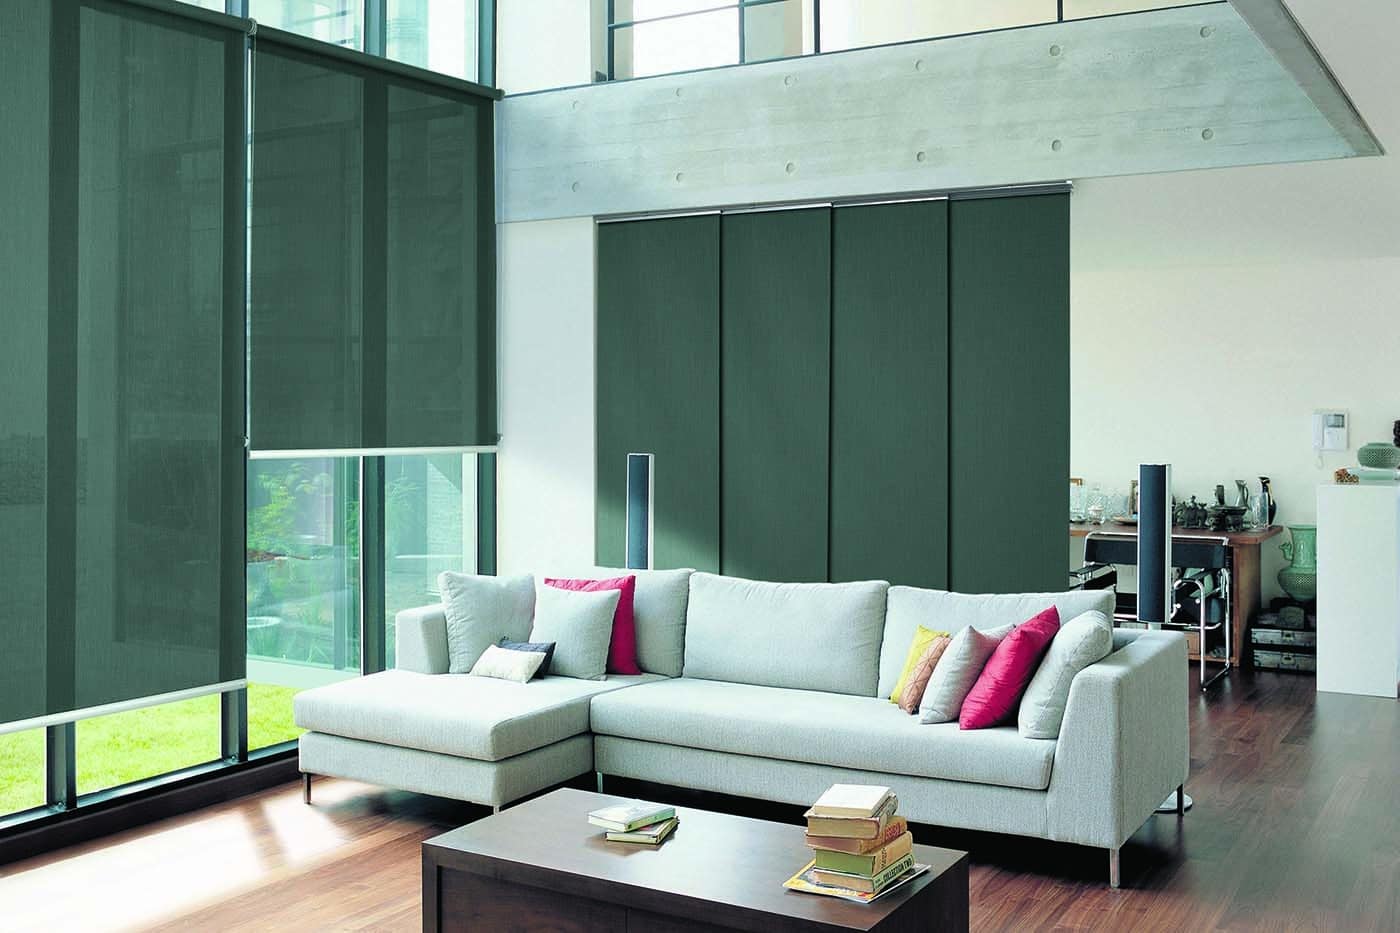 Modern contemporary living space featuring Luxaflex Panel Glide Blinds as room dividers. Available for sale in our Sydney showroom.